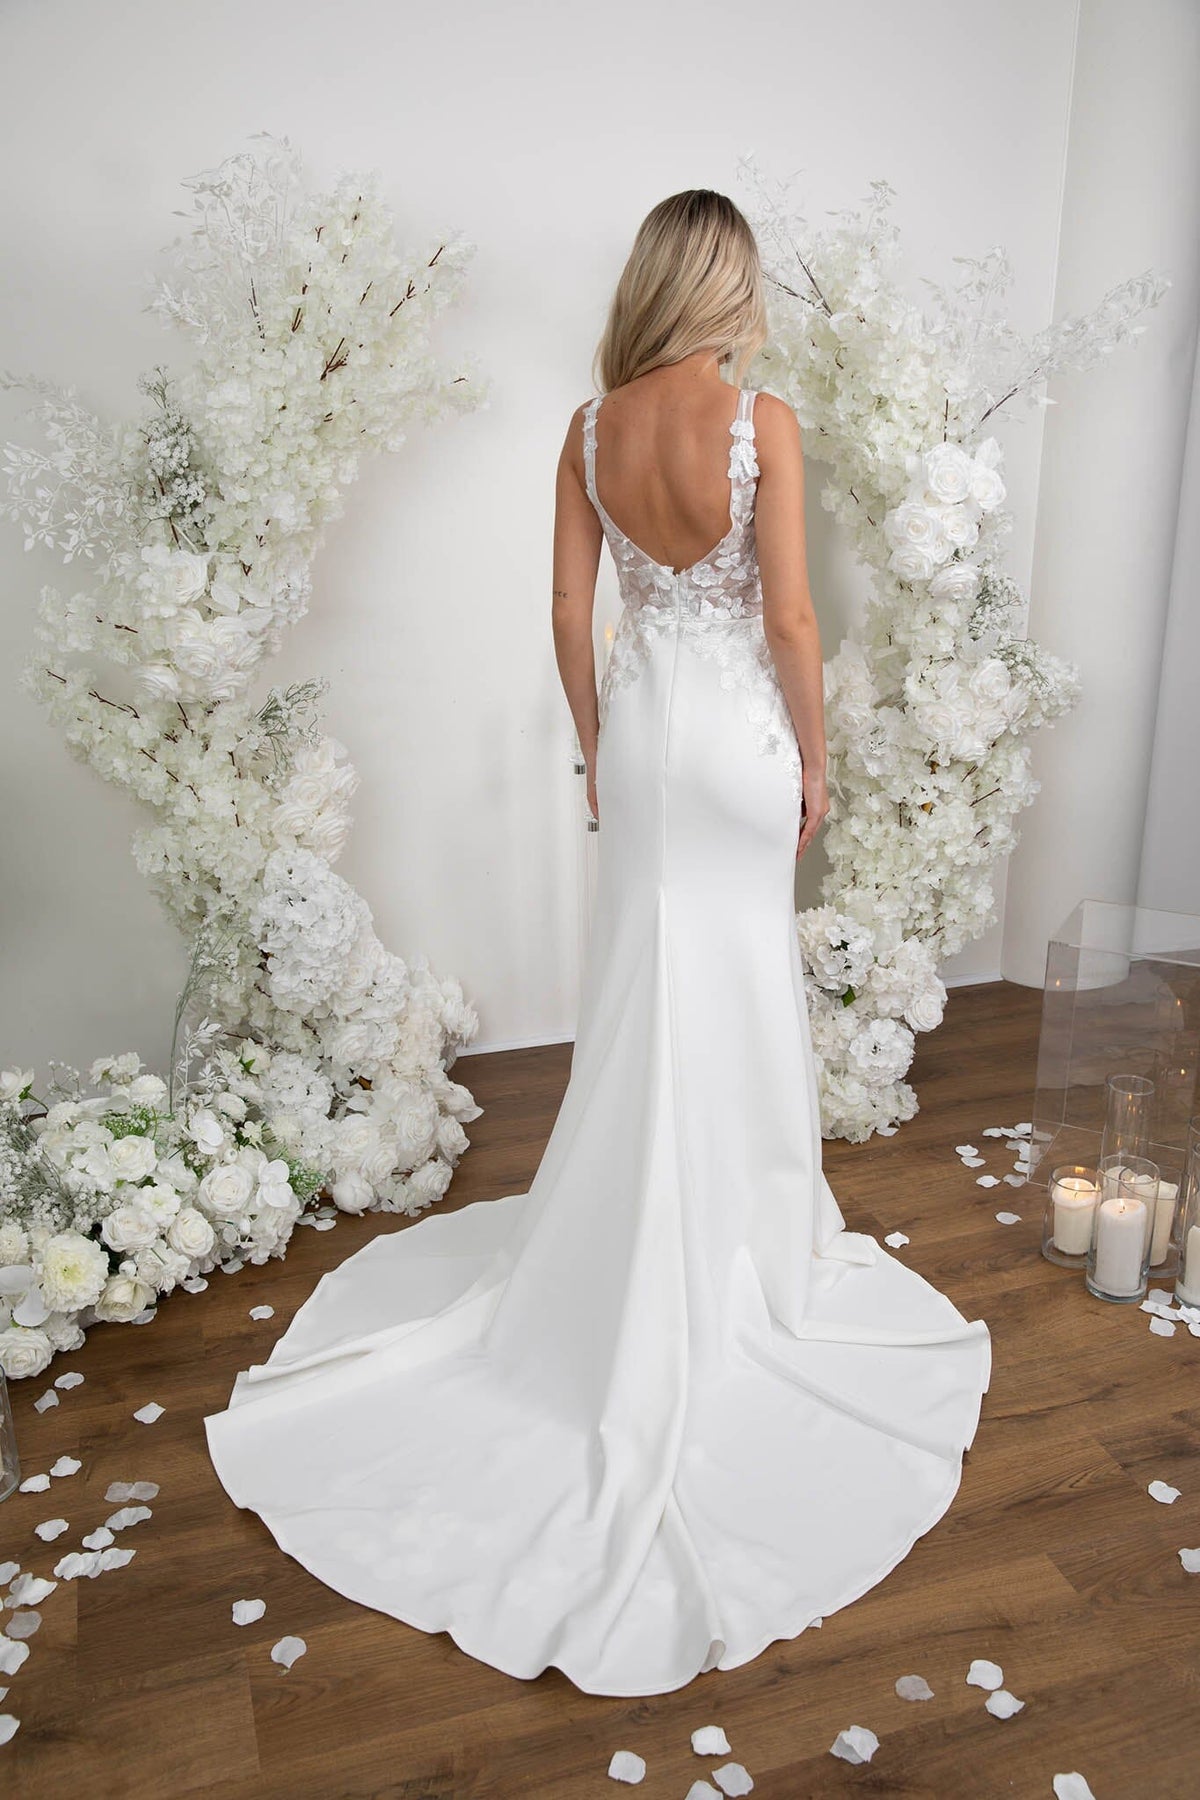 Crêpe gown in white - CO